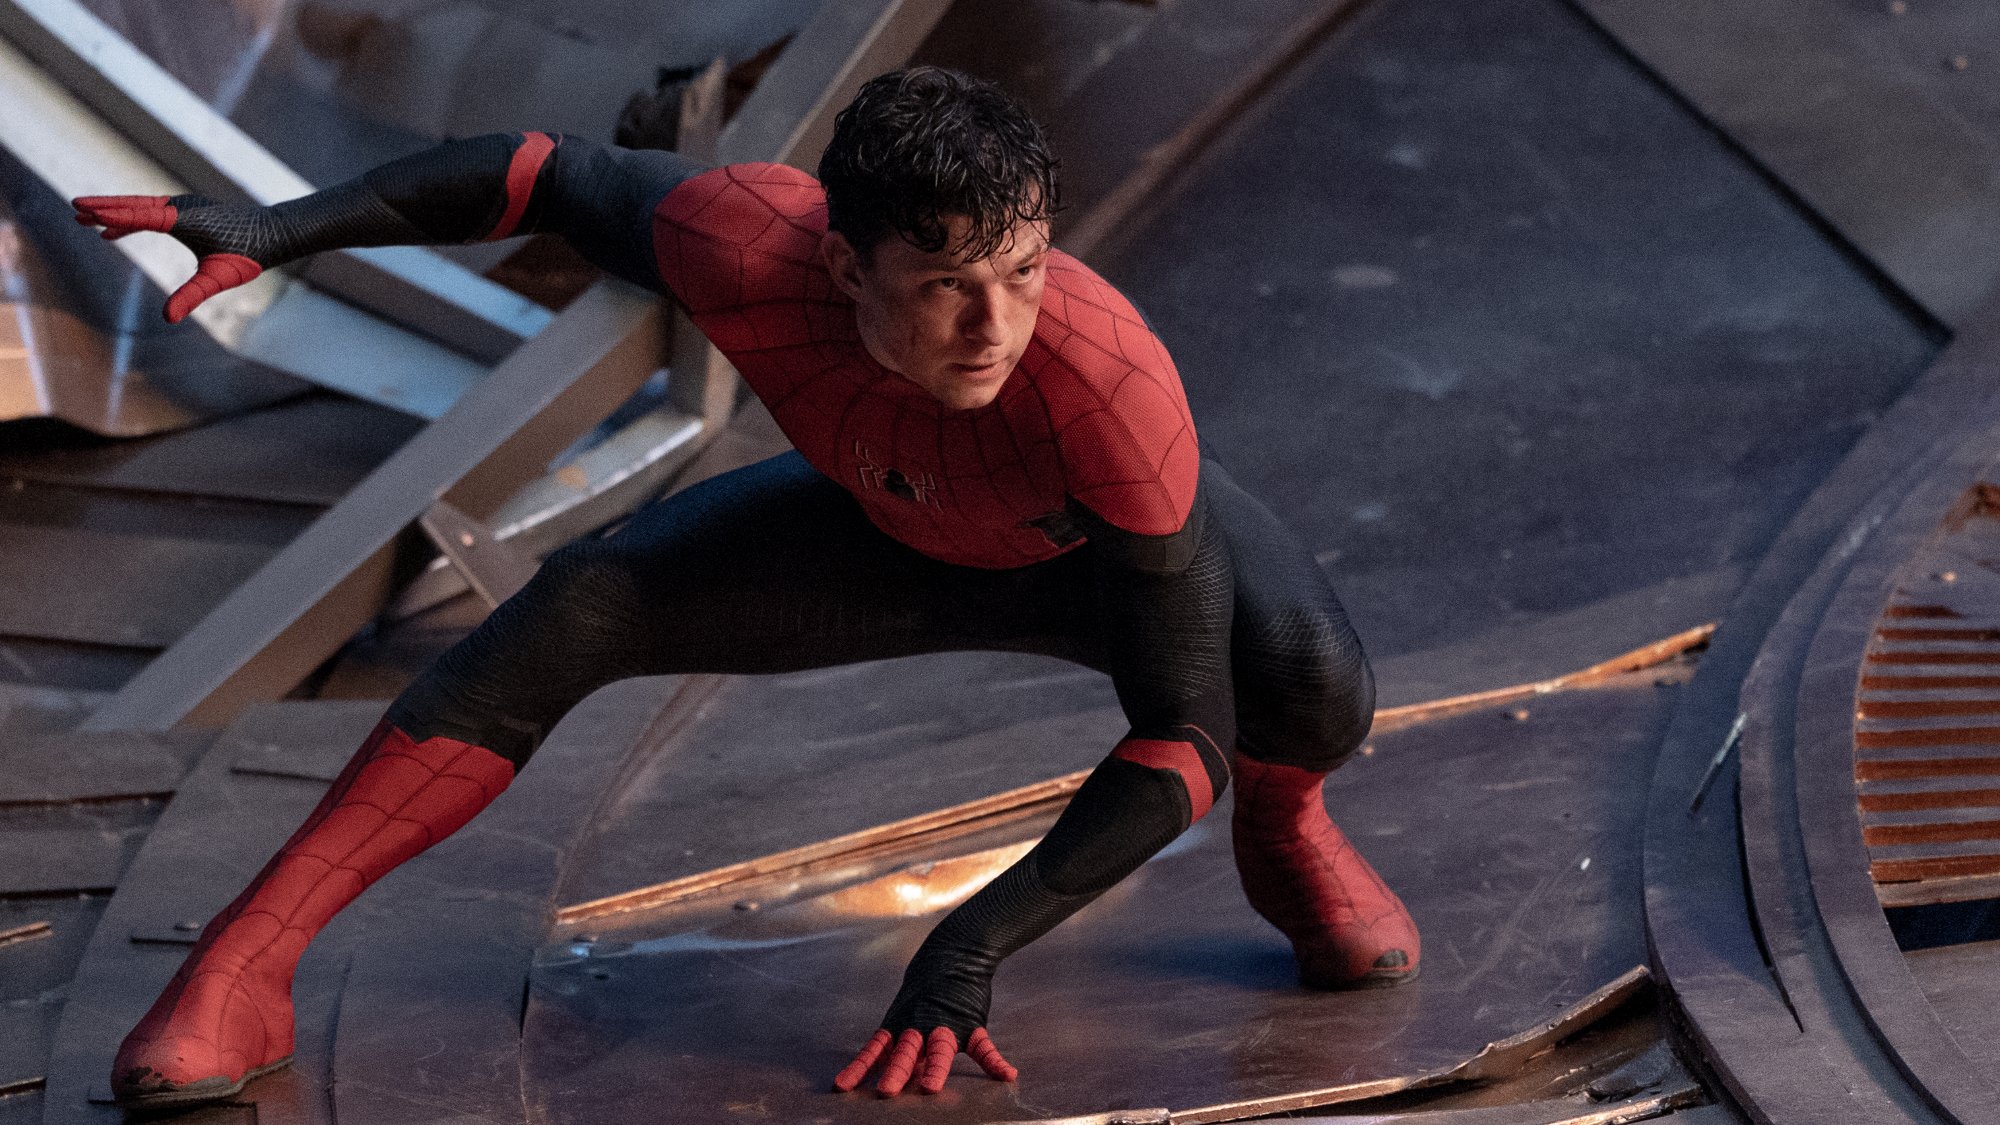 'Spider-Man: No Way Home' Tom Holland as Spider-Man/Peter Parker crouching without the Spider-Man mask